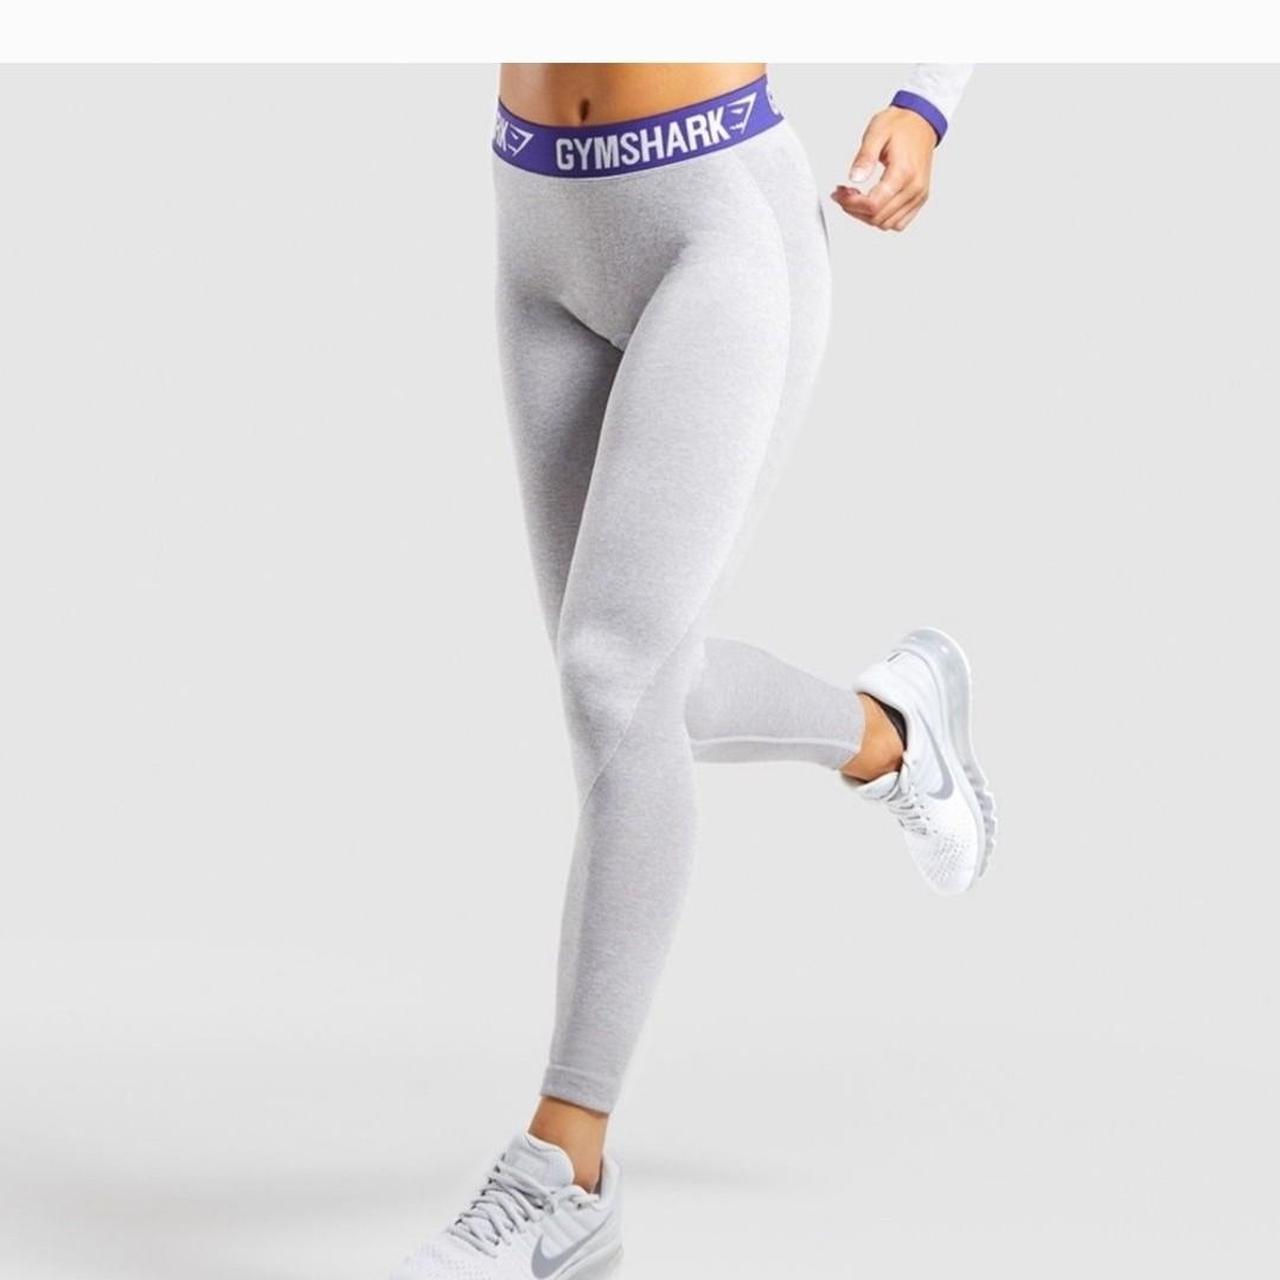 Gymshark review: Are the leggings worth it? - Reviewed